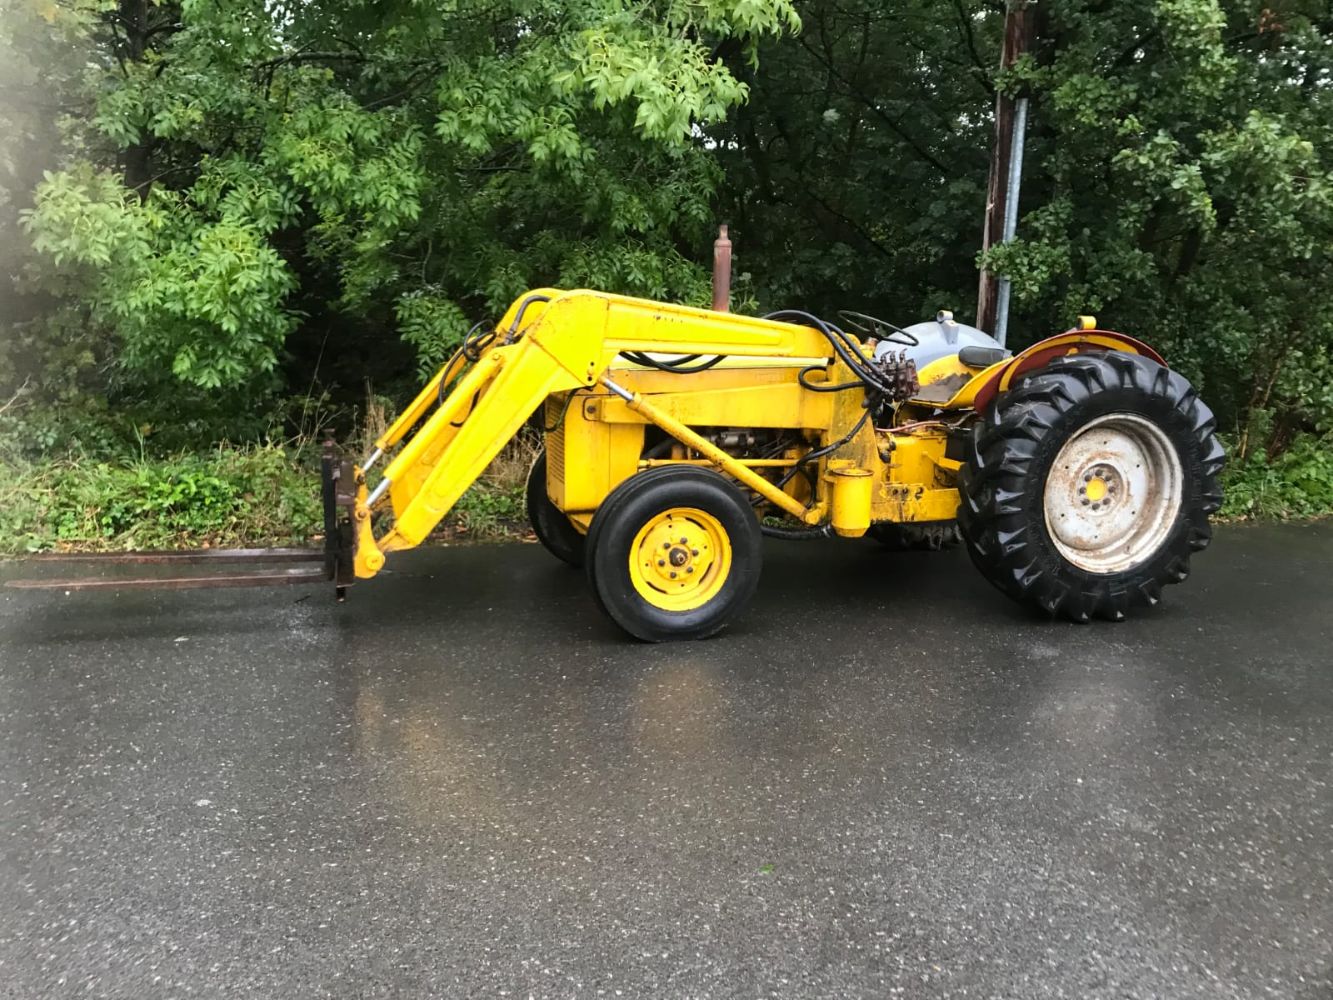 MASSEY FERGUSON DIESEL INDUSTRIAL LOADER TRACTOR, FORDSON MAJOR DIESEL LOADER TRACTOR, FORDSON COUNTY CRAWLER ALL ENDS FROM 7PM TUESDAY!